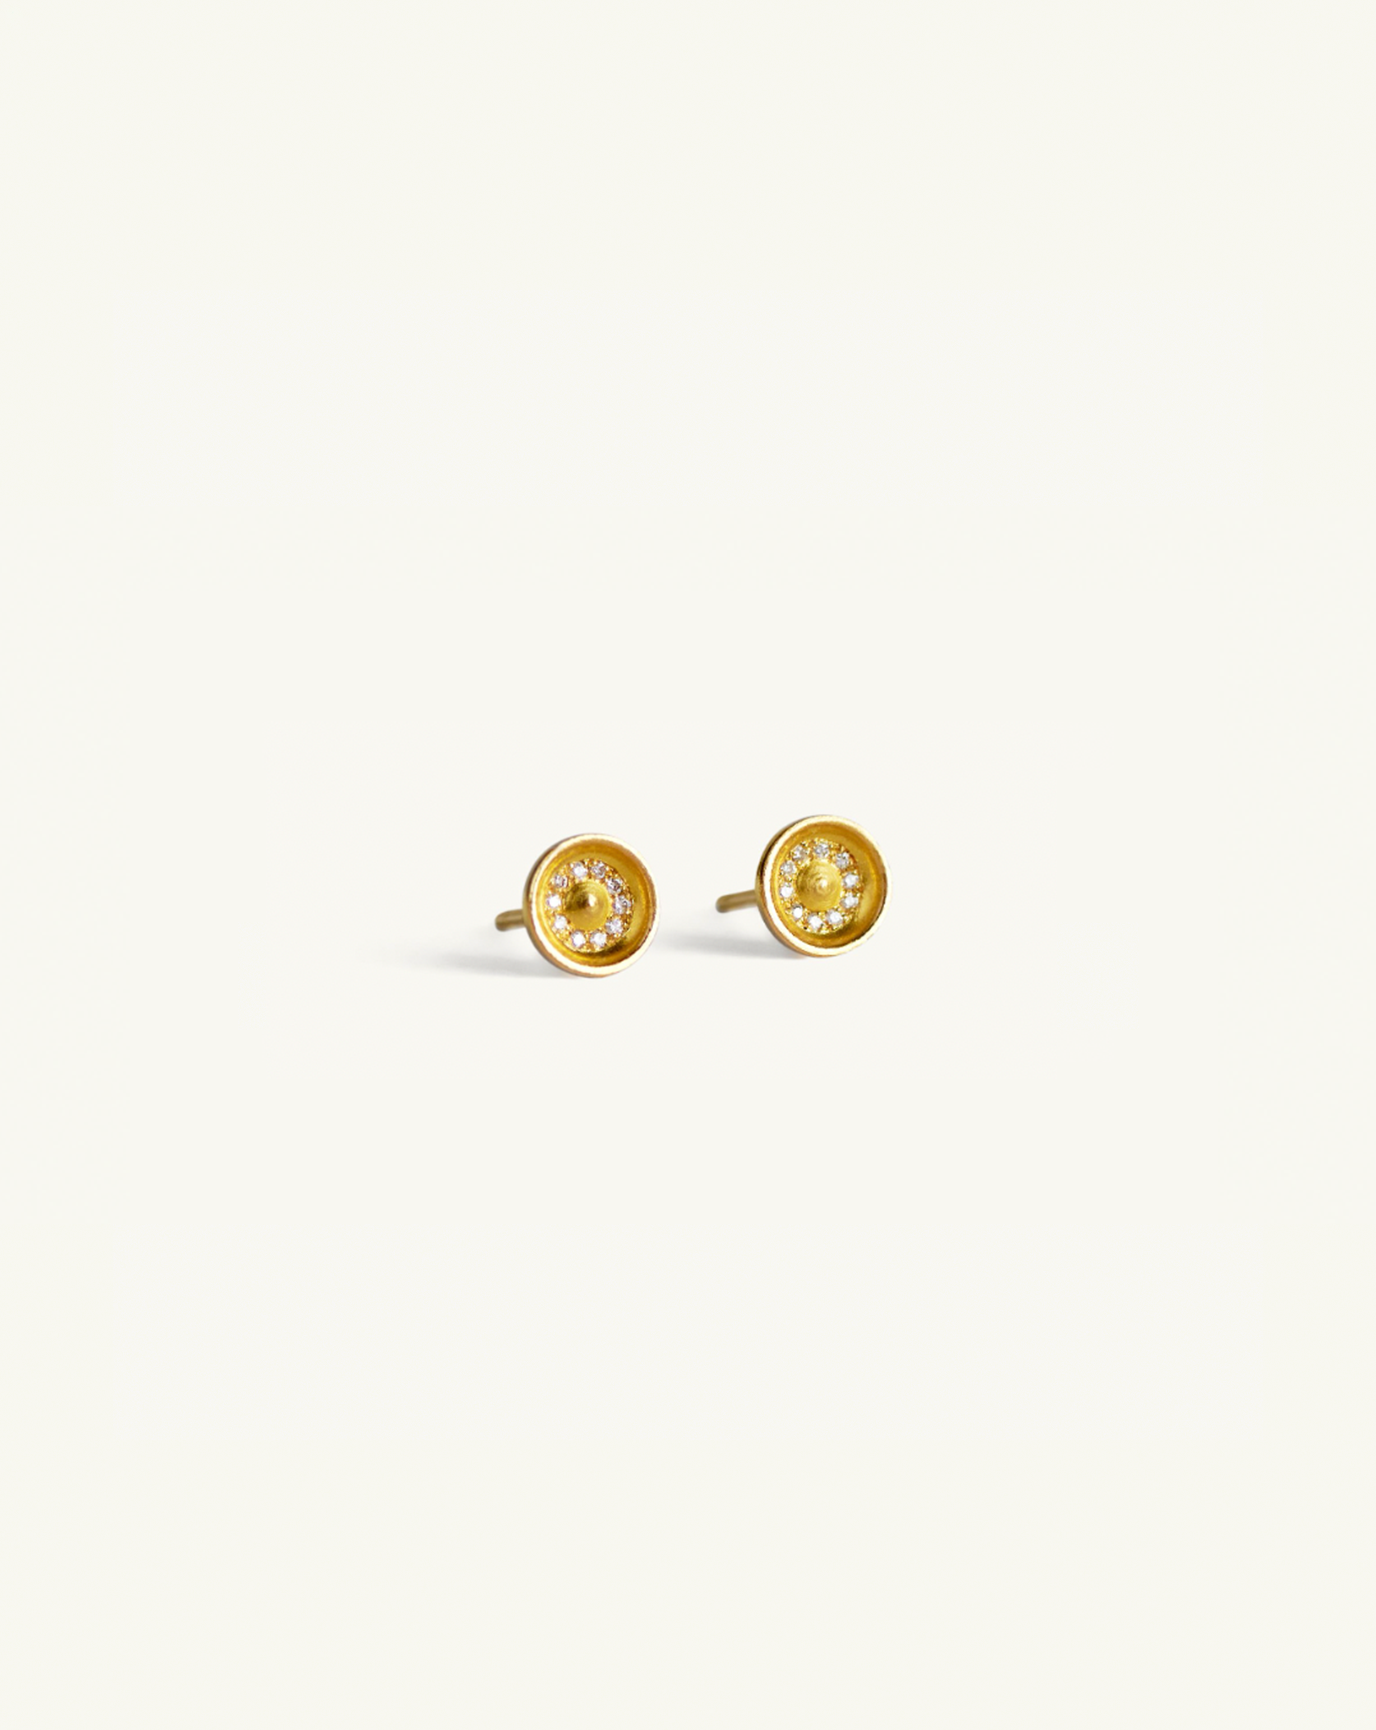 Product image of the large concave gold studs with white diamond pavé